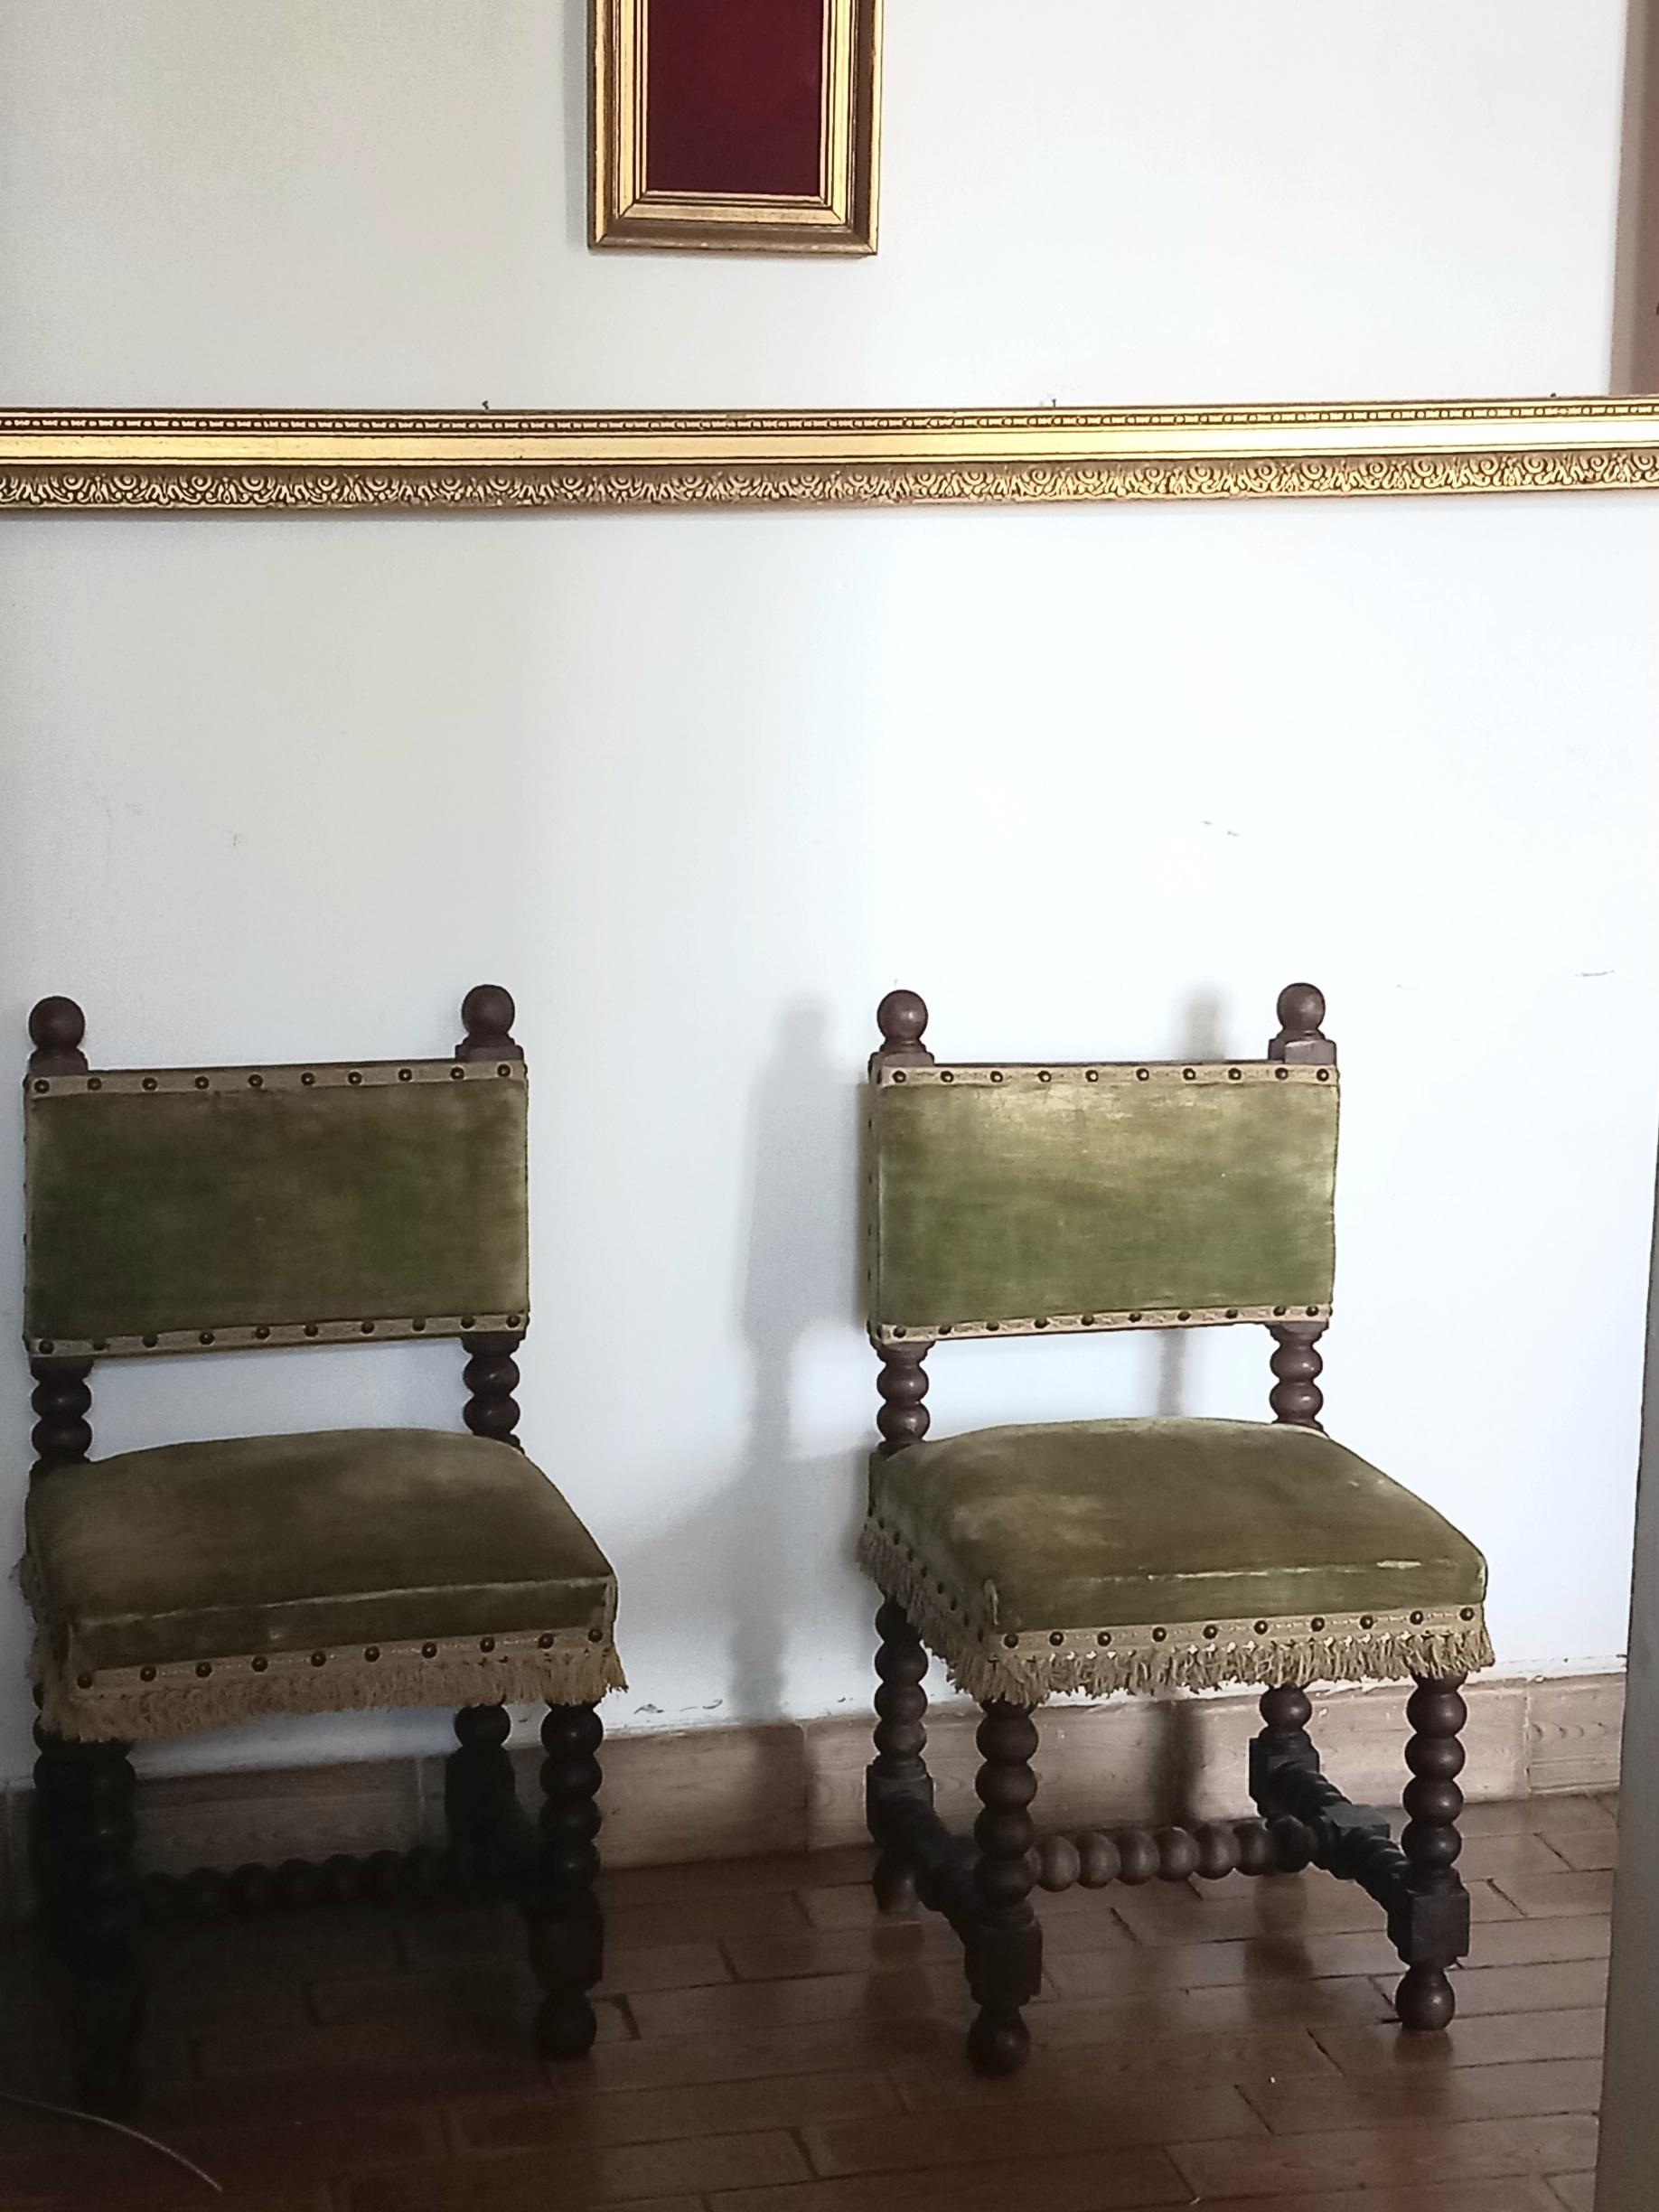 19th Century Pair of Chairs o Stools Turned Legs and Velvet Seat , Spain